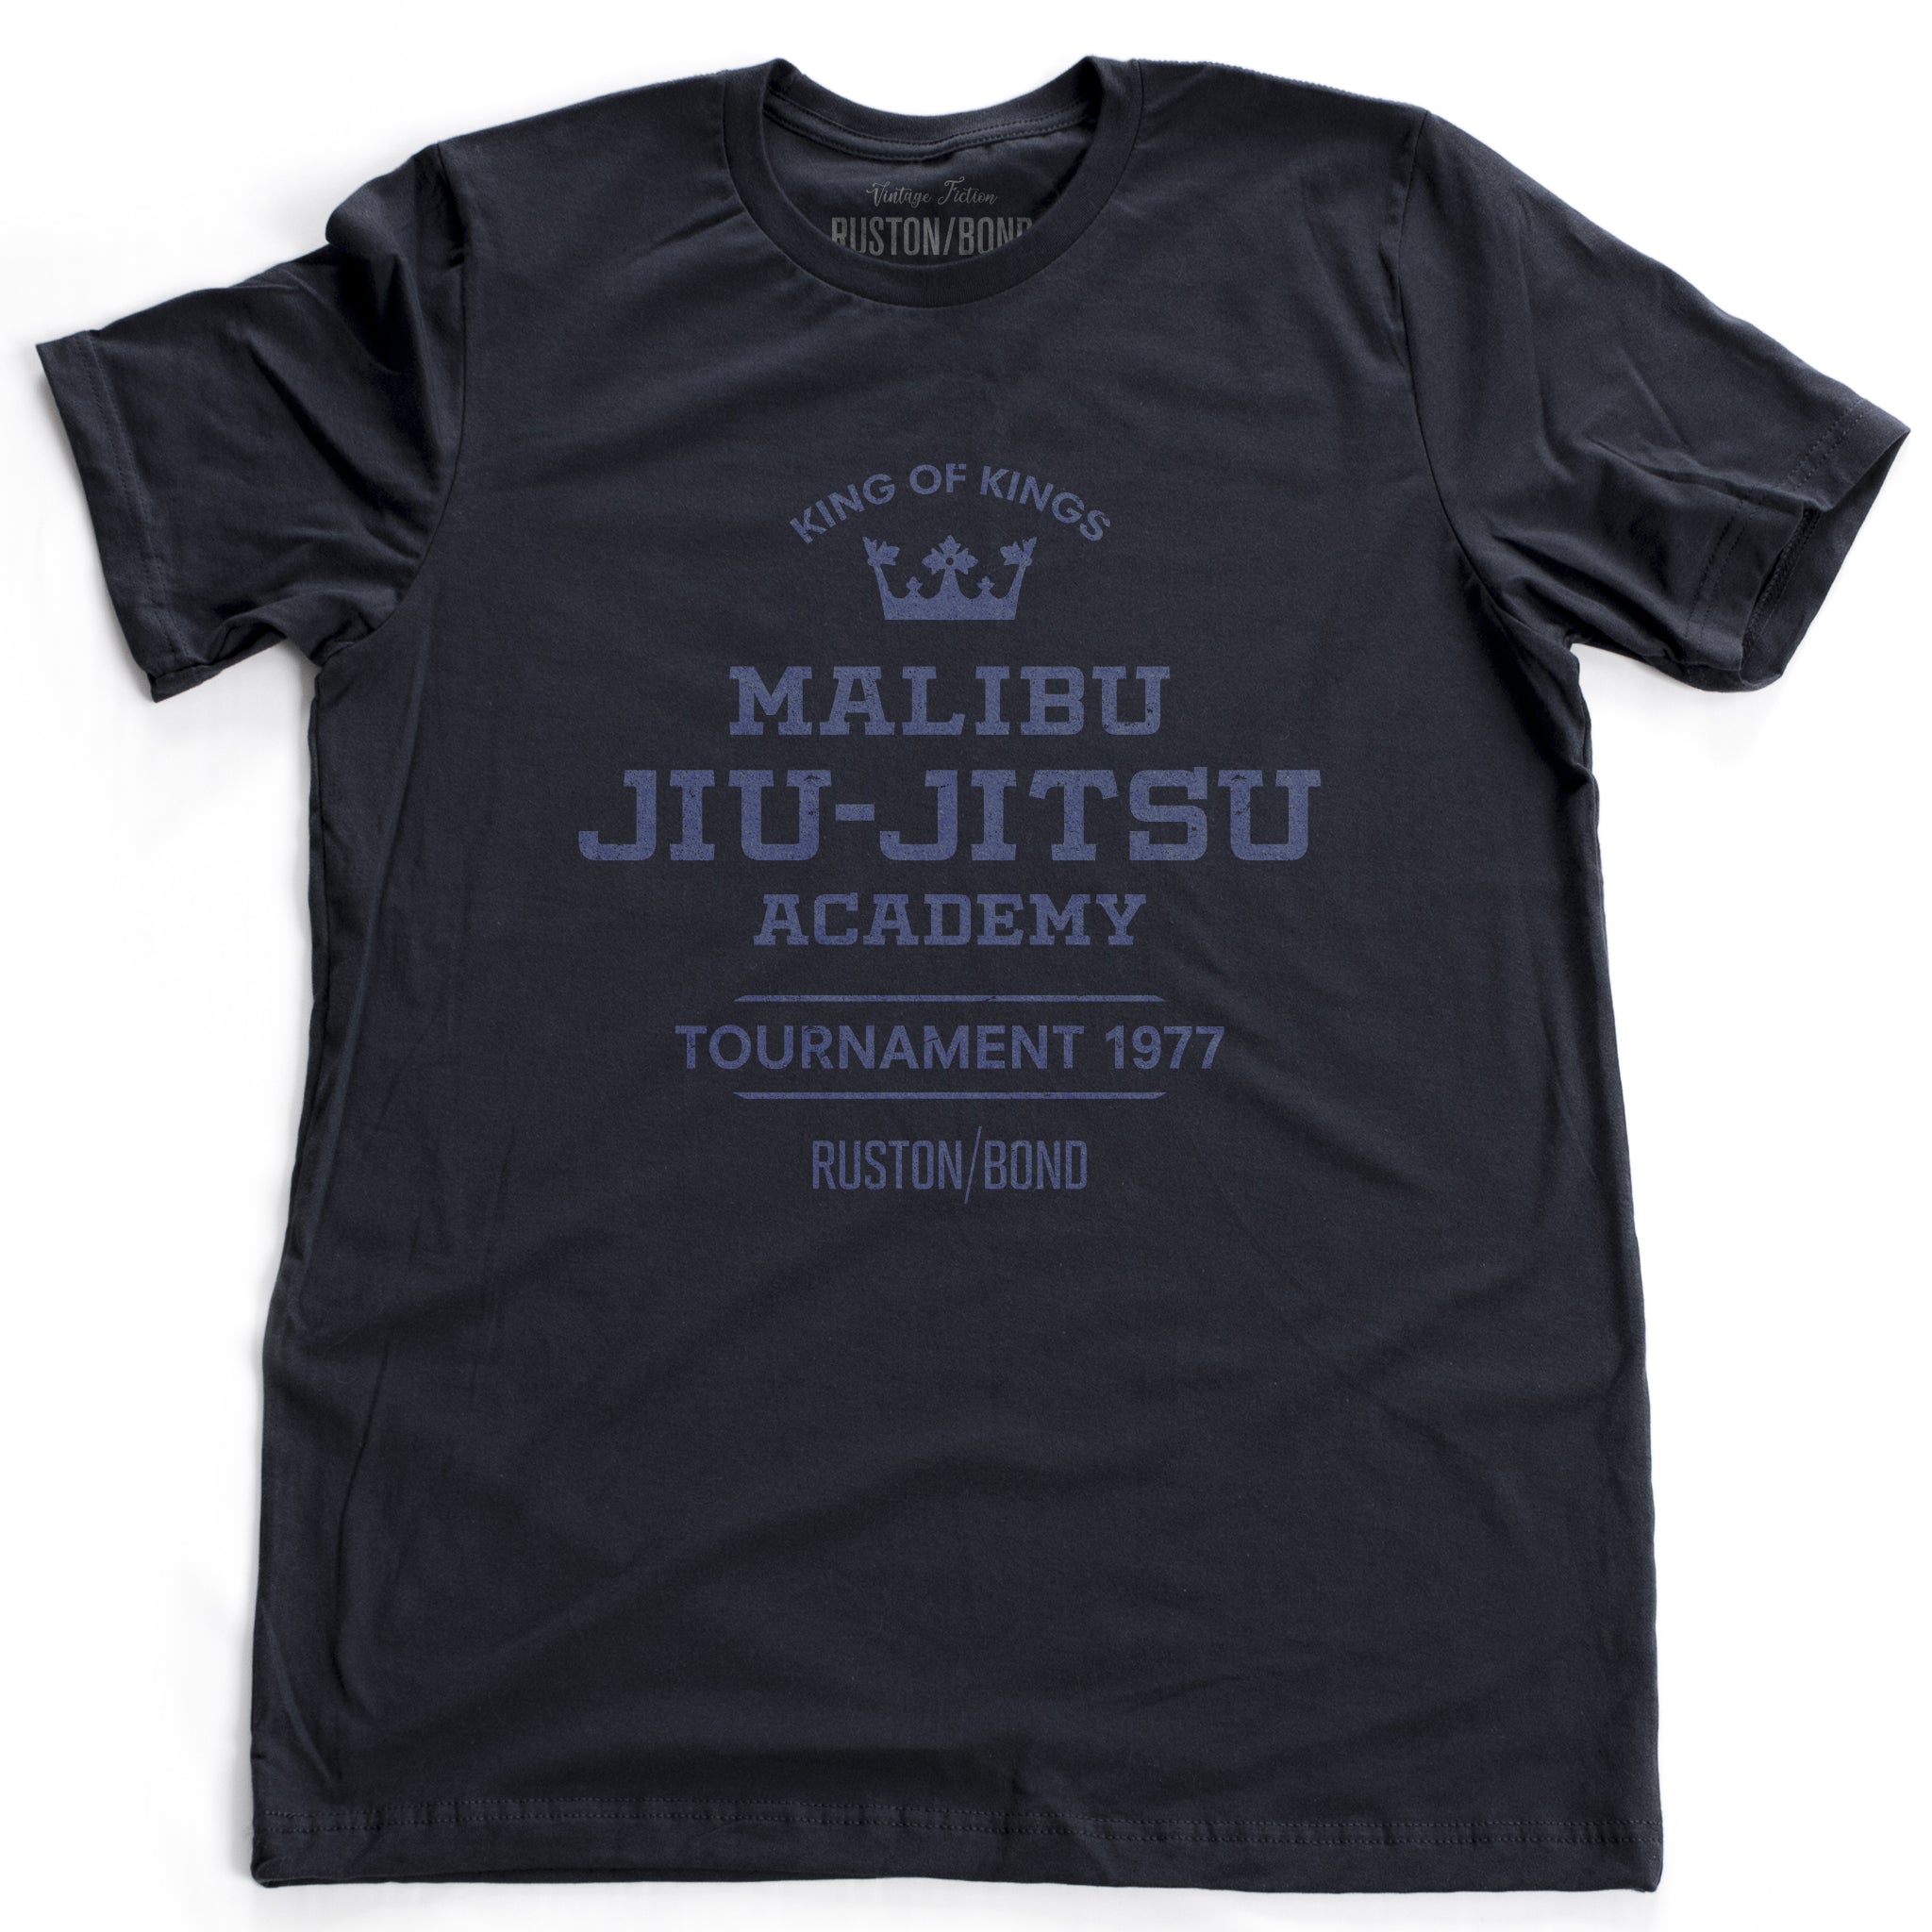 A fashionable, vintage-inspired retro t-shirt in classic Navy Blue, featuring a graphic commemorating a sarcastic and fictitious Malibu (California) Jiu Jitsu academy and a 1977 tournament. By fashion brand Ruston/Bond, from wolfsaint.net